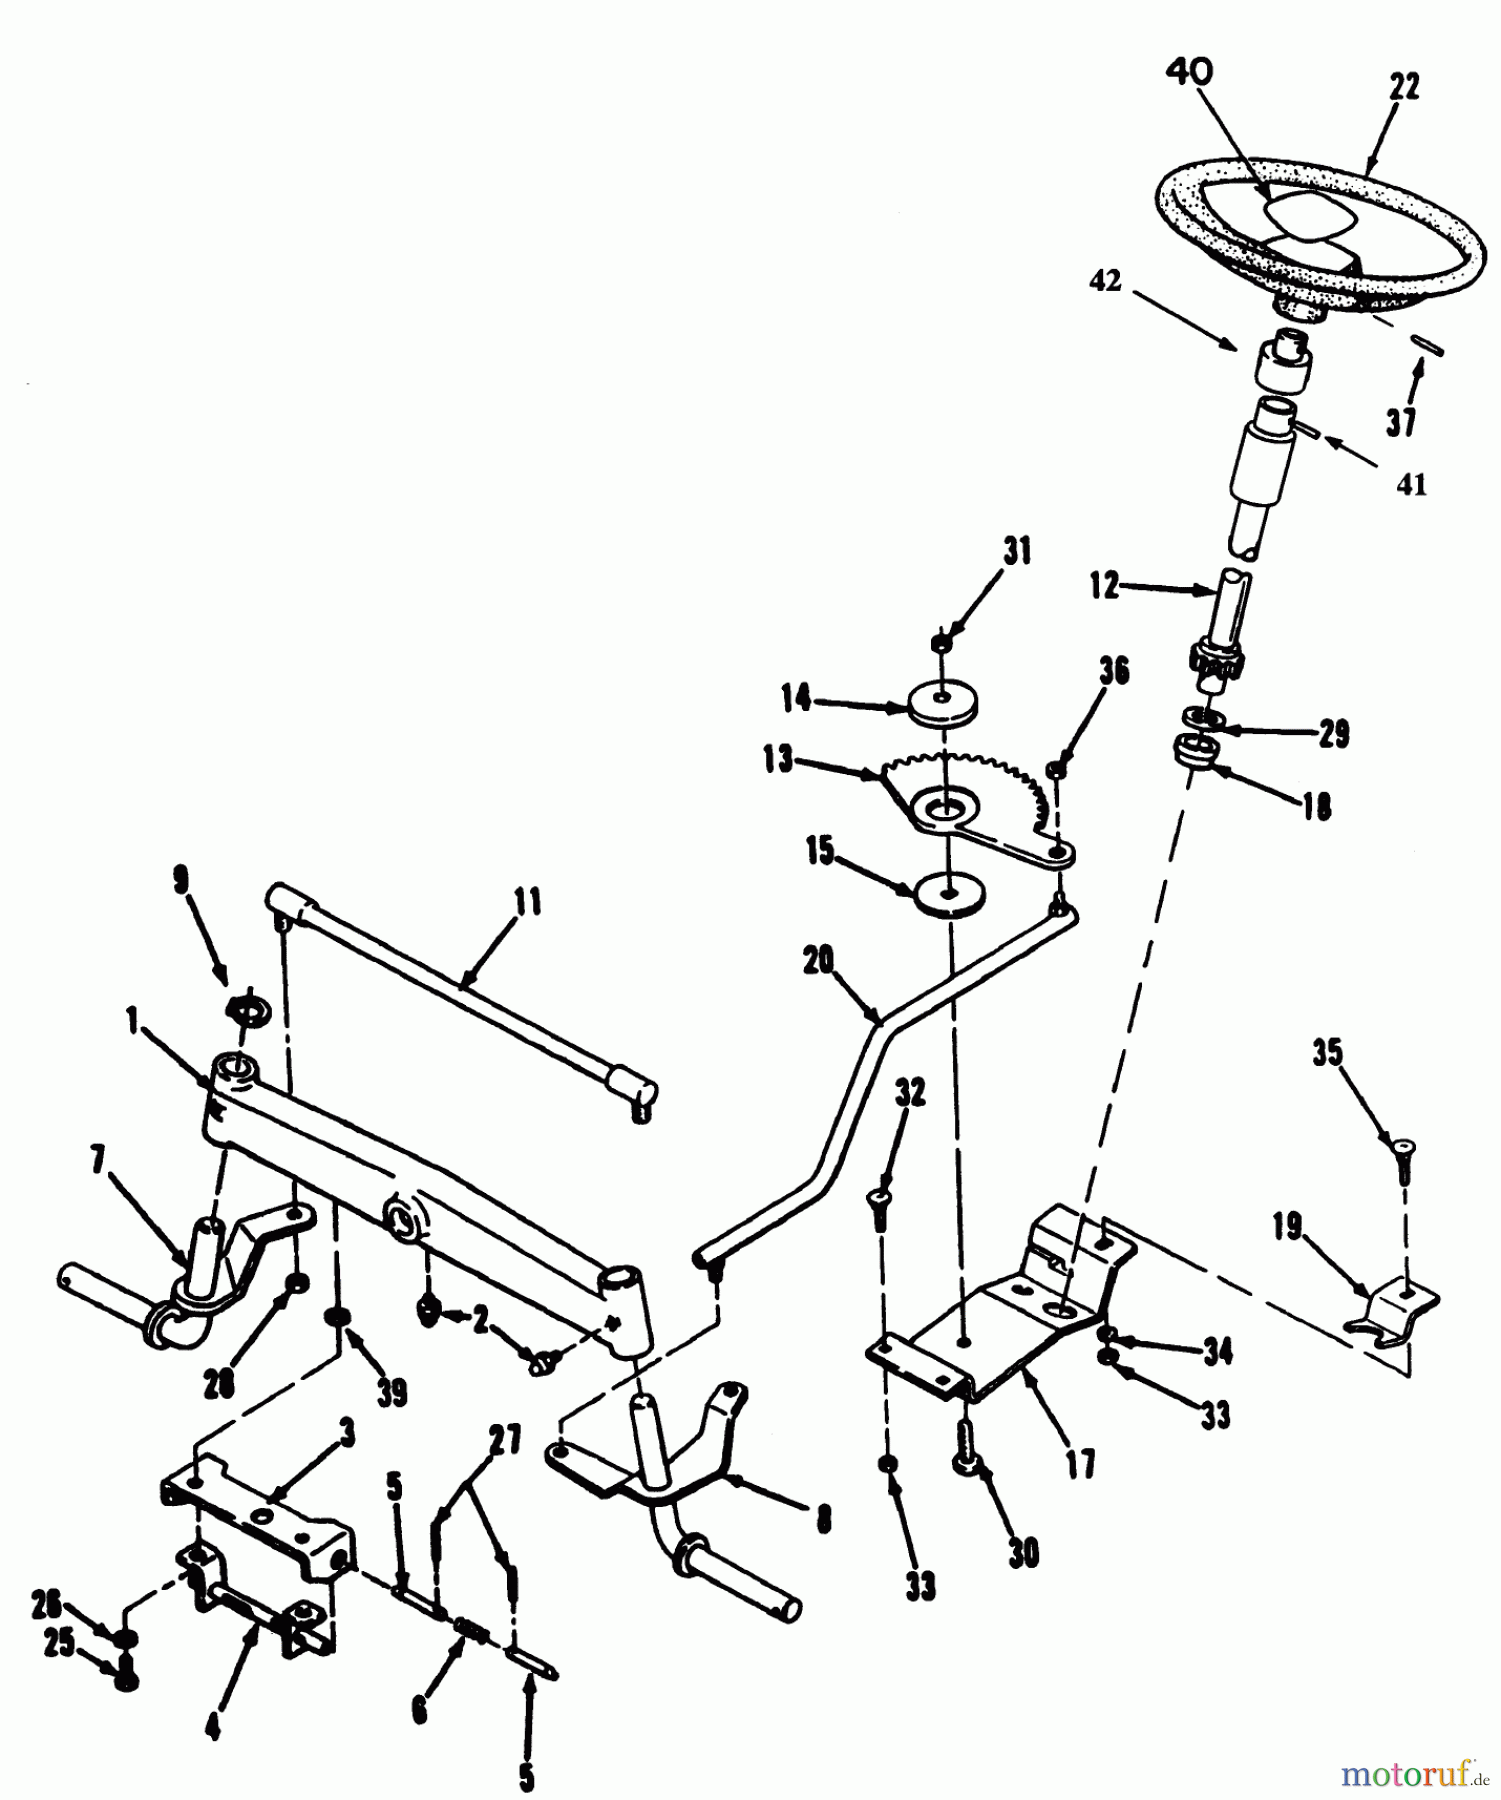  Toro Neu Mowers, Lawn & Garden Tractor Seite 1 32-10B503 (210-5) - Toro 210-5 Tractor, 1992 (2000001-2999999) FRONT AXLE & STEERING ASSEMBLY